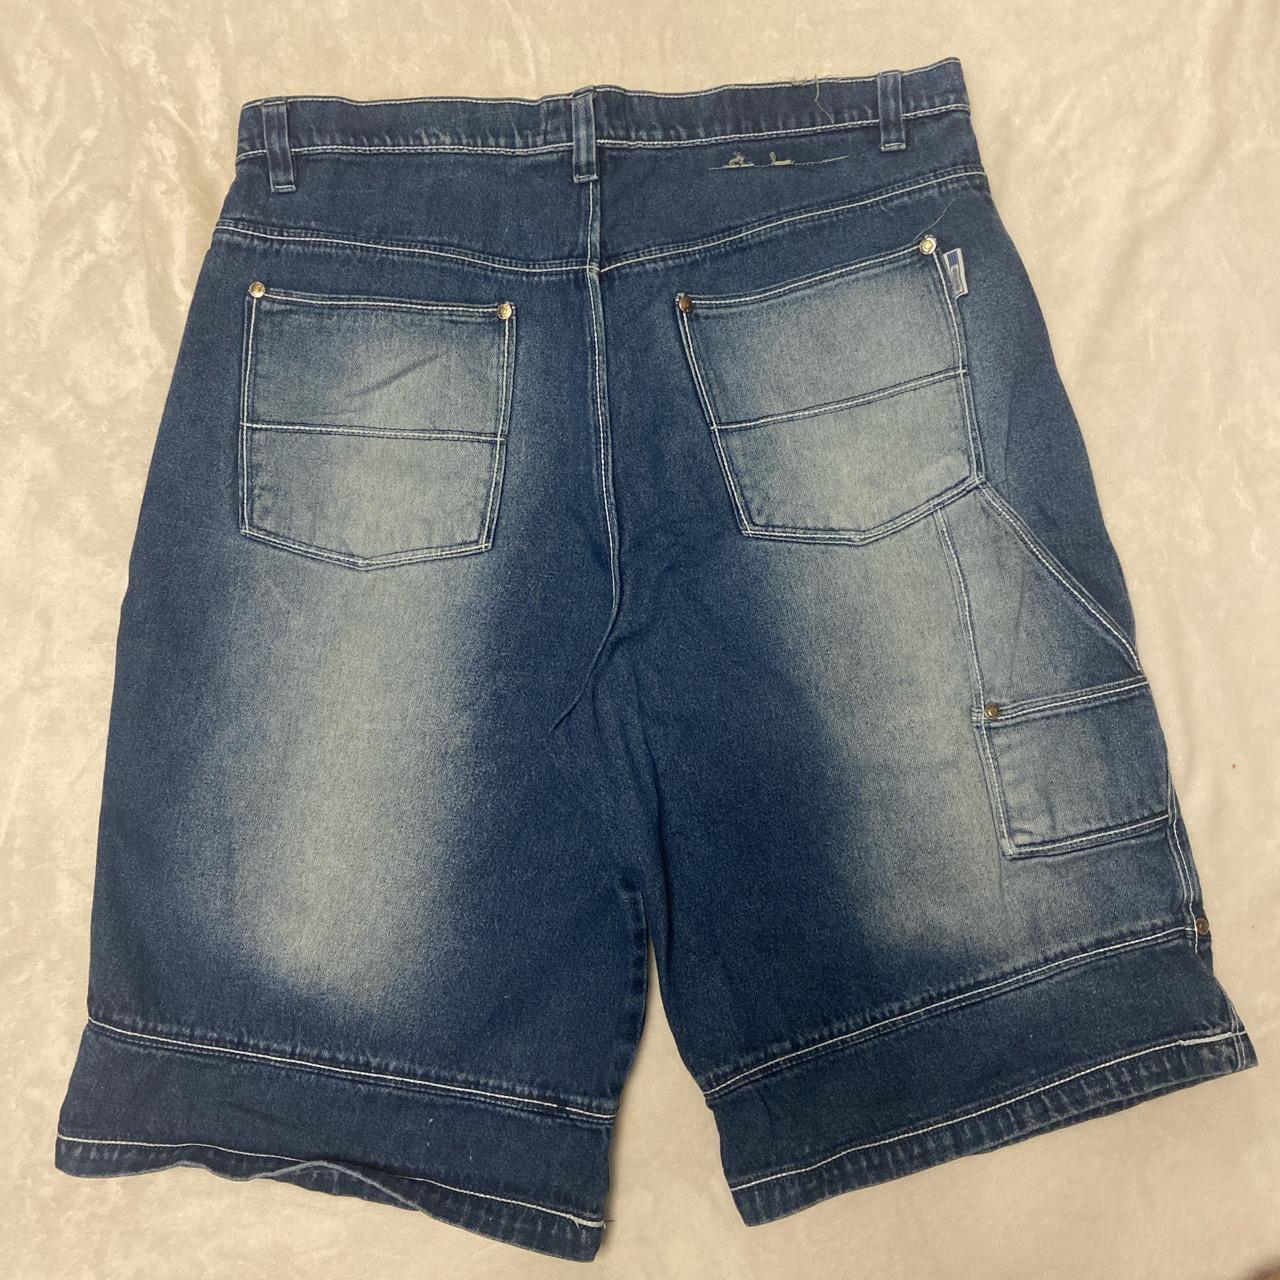 amazing Evolution jorts perfect fit on these can’t... - Depop